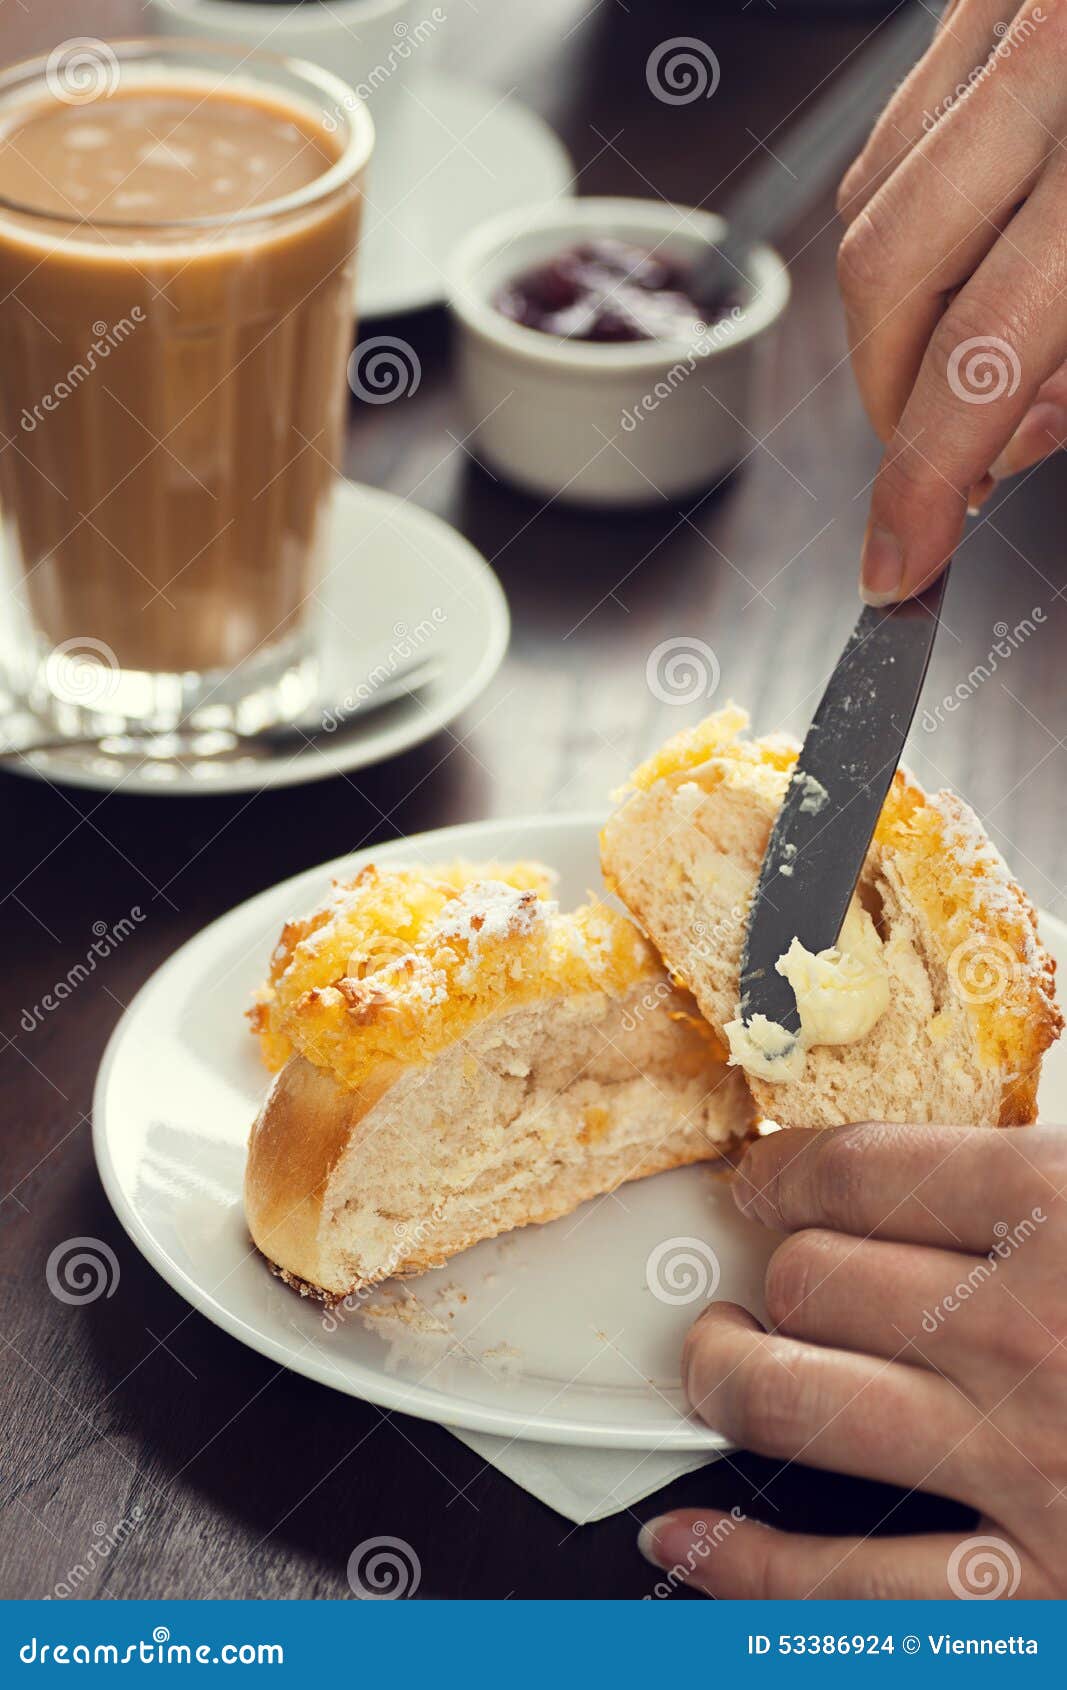 womans hand spreads butter on pÃÂ£o de deus roll